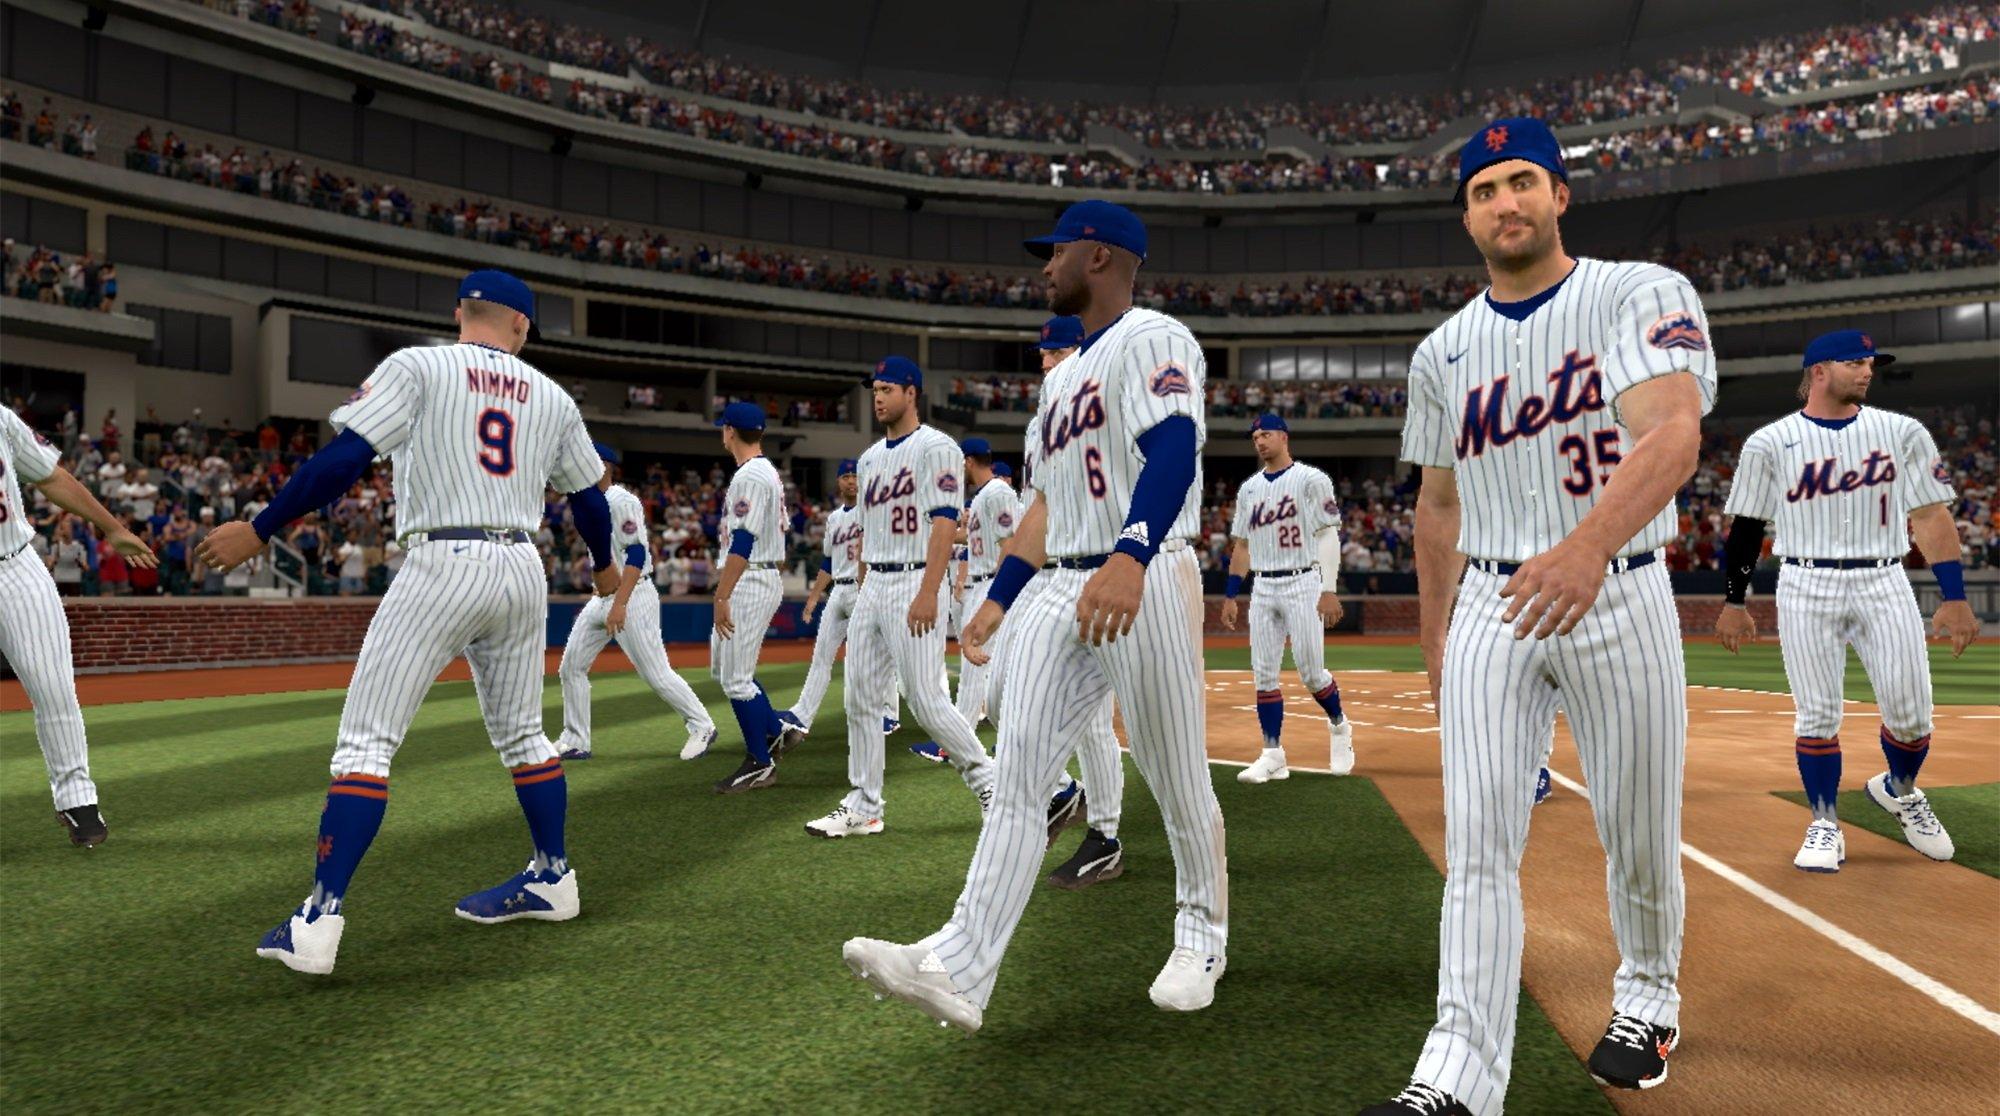 Dodgers: Every player rating in MLB The Show 18 and what it should be -  Page 5